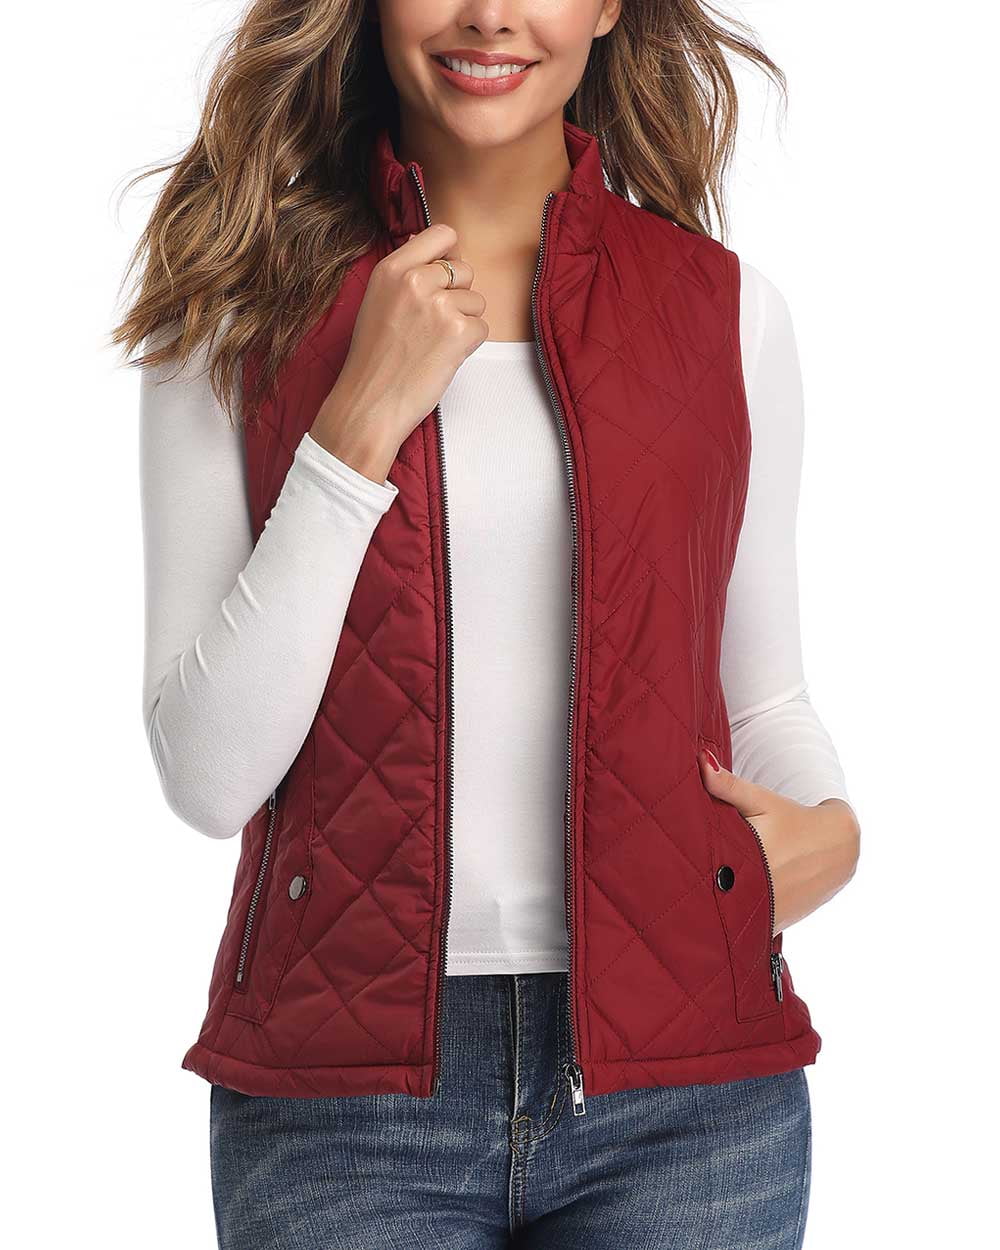 MISS MOLY Womens Lightweight Quilted Zip Vest Stand Collar Gilet Padded Sleeveless Vest